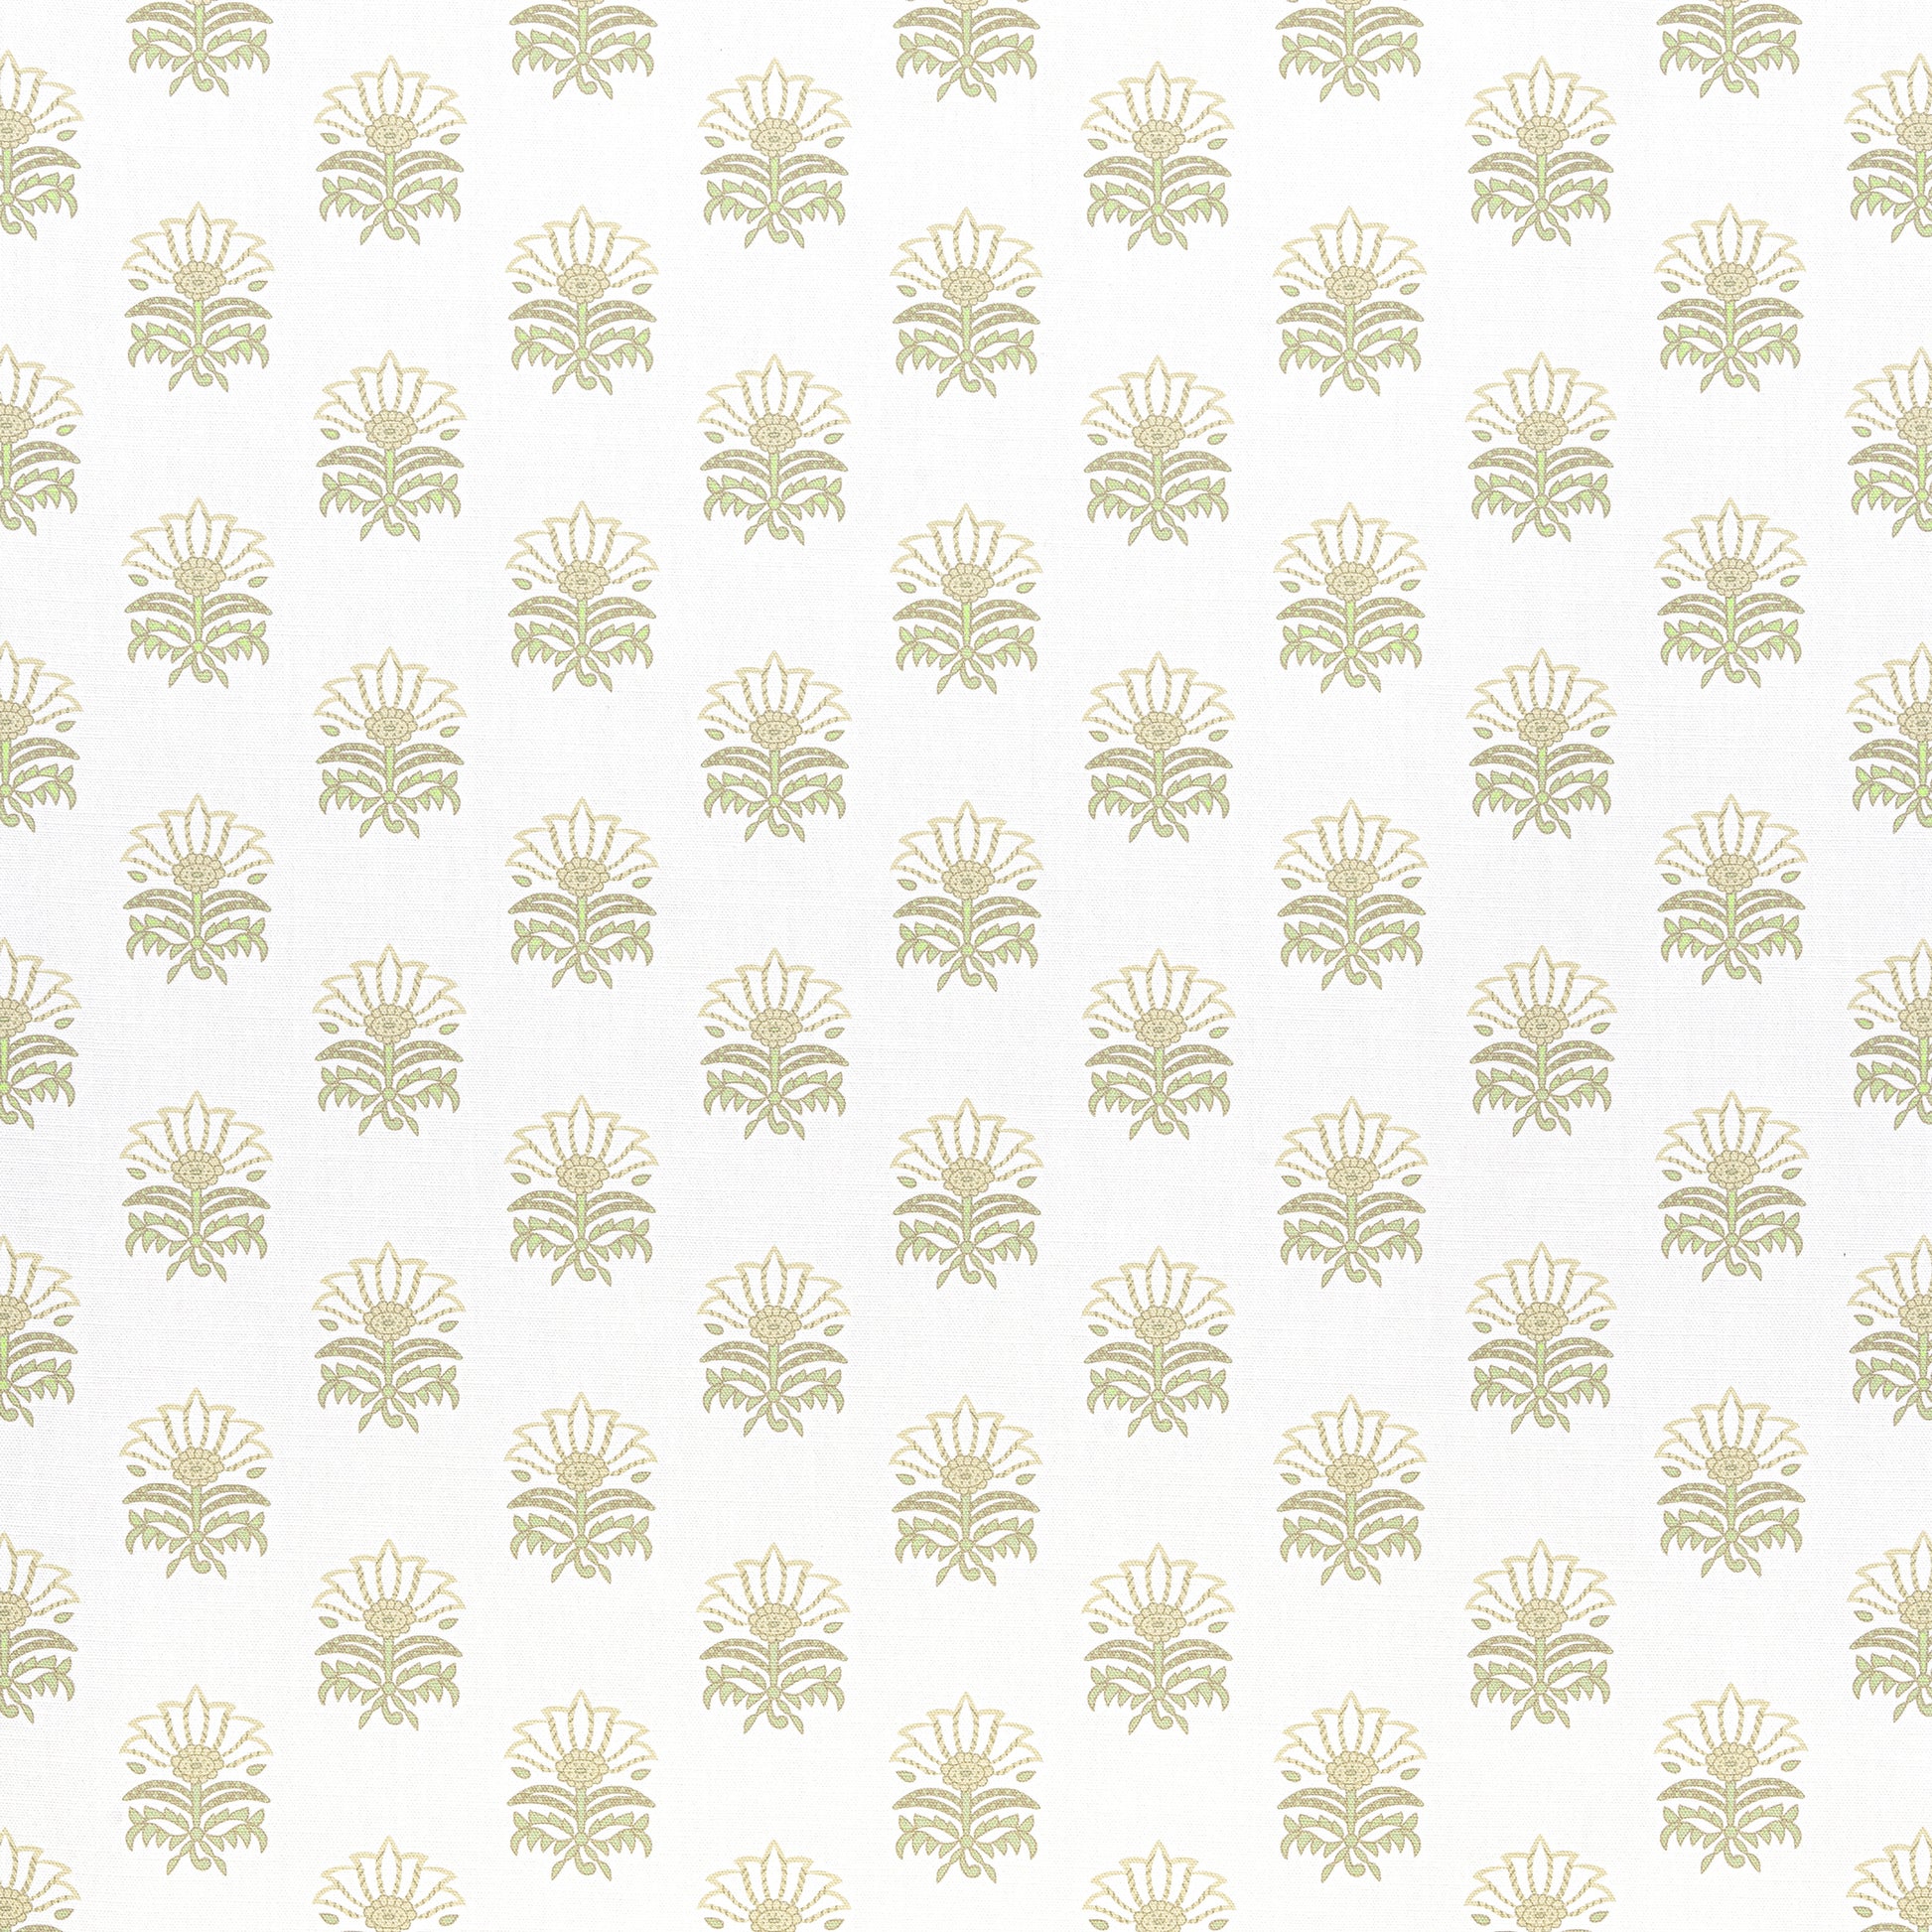 Purchase  Ann French Fabric Product AF15158  pattern name  Milford